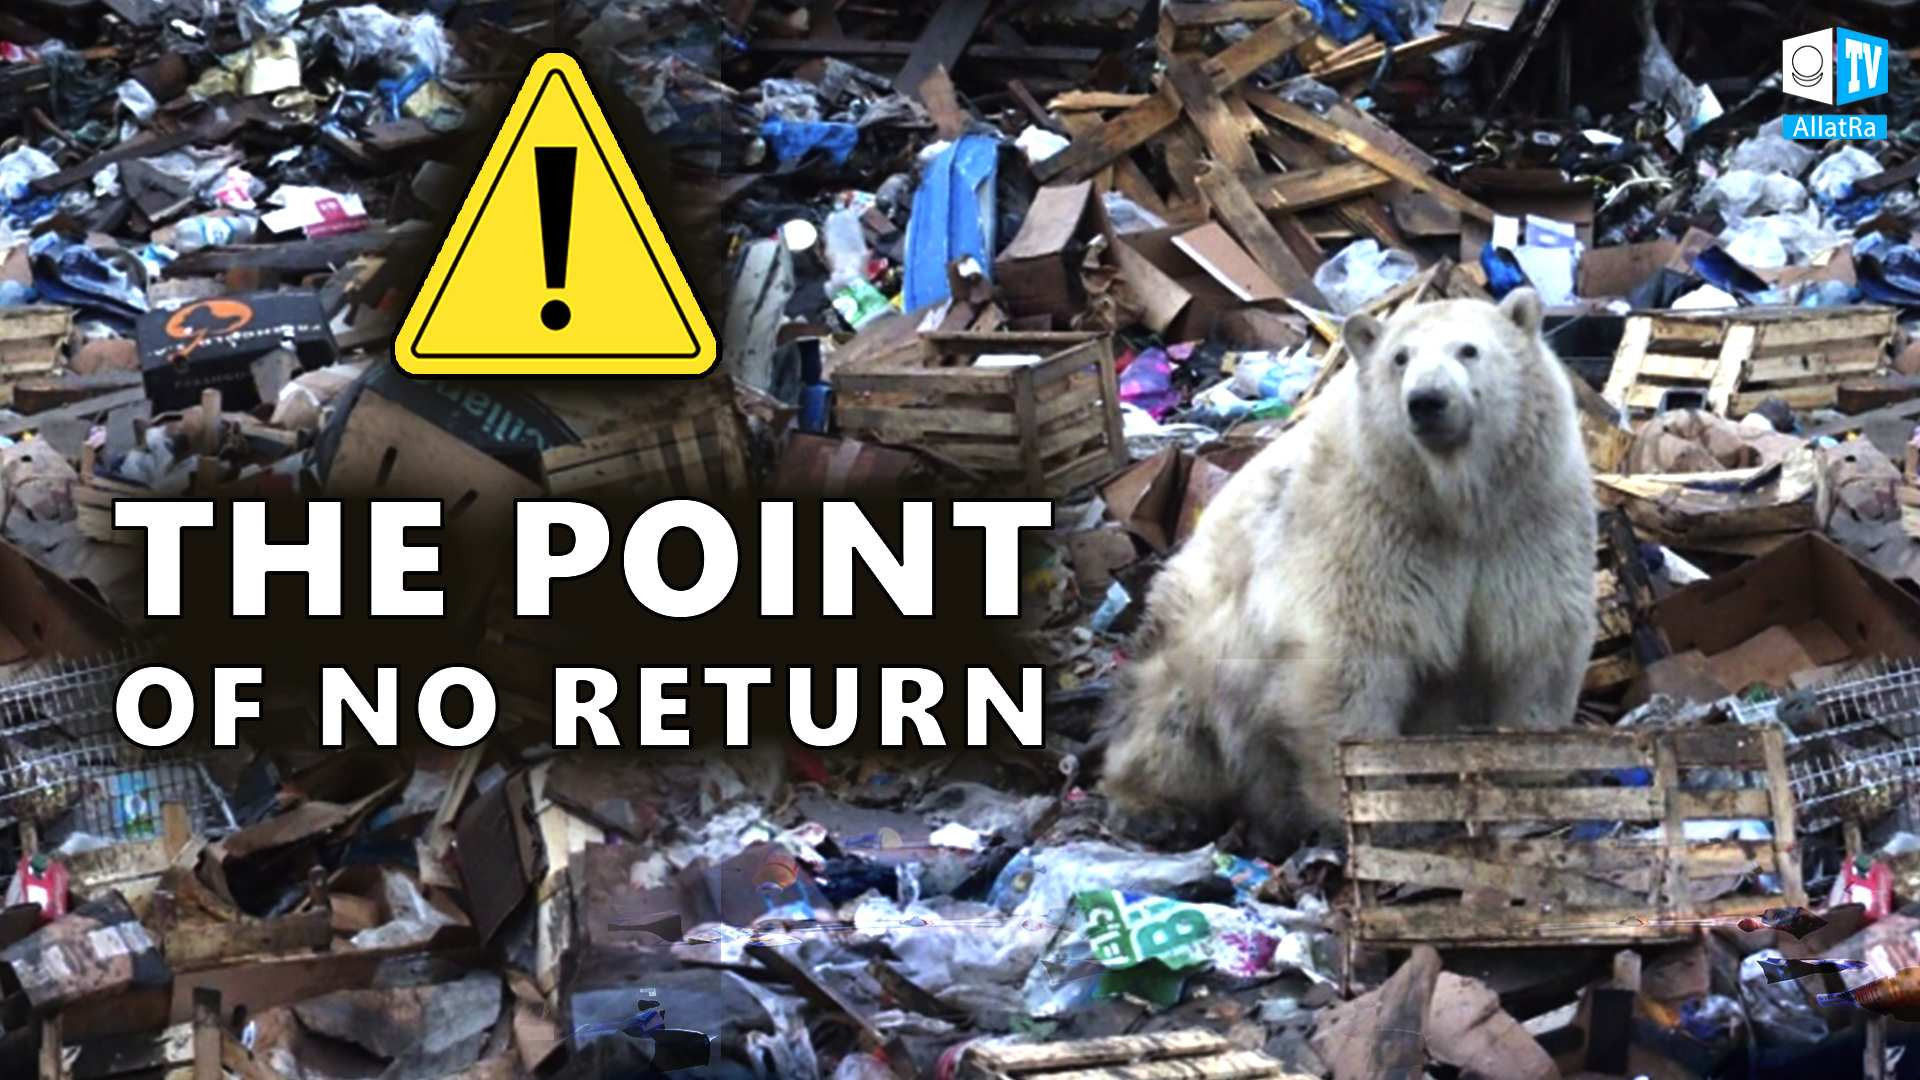 How close are we to the point of no return?